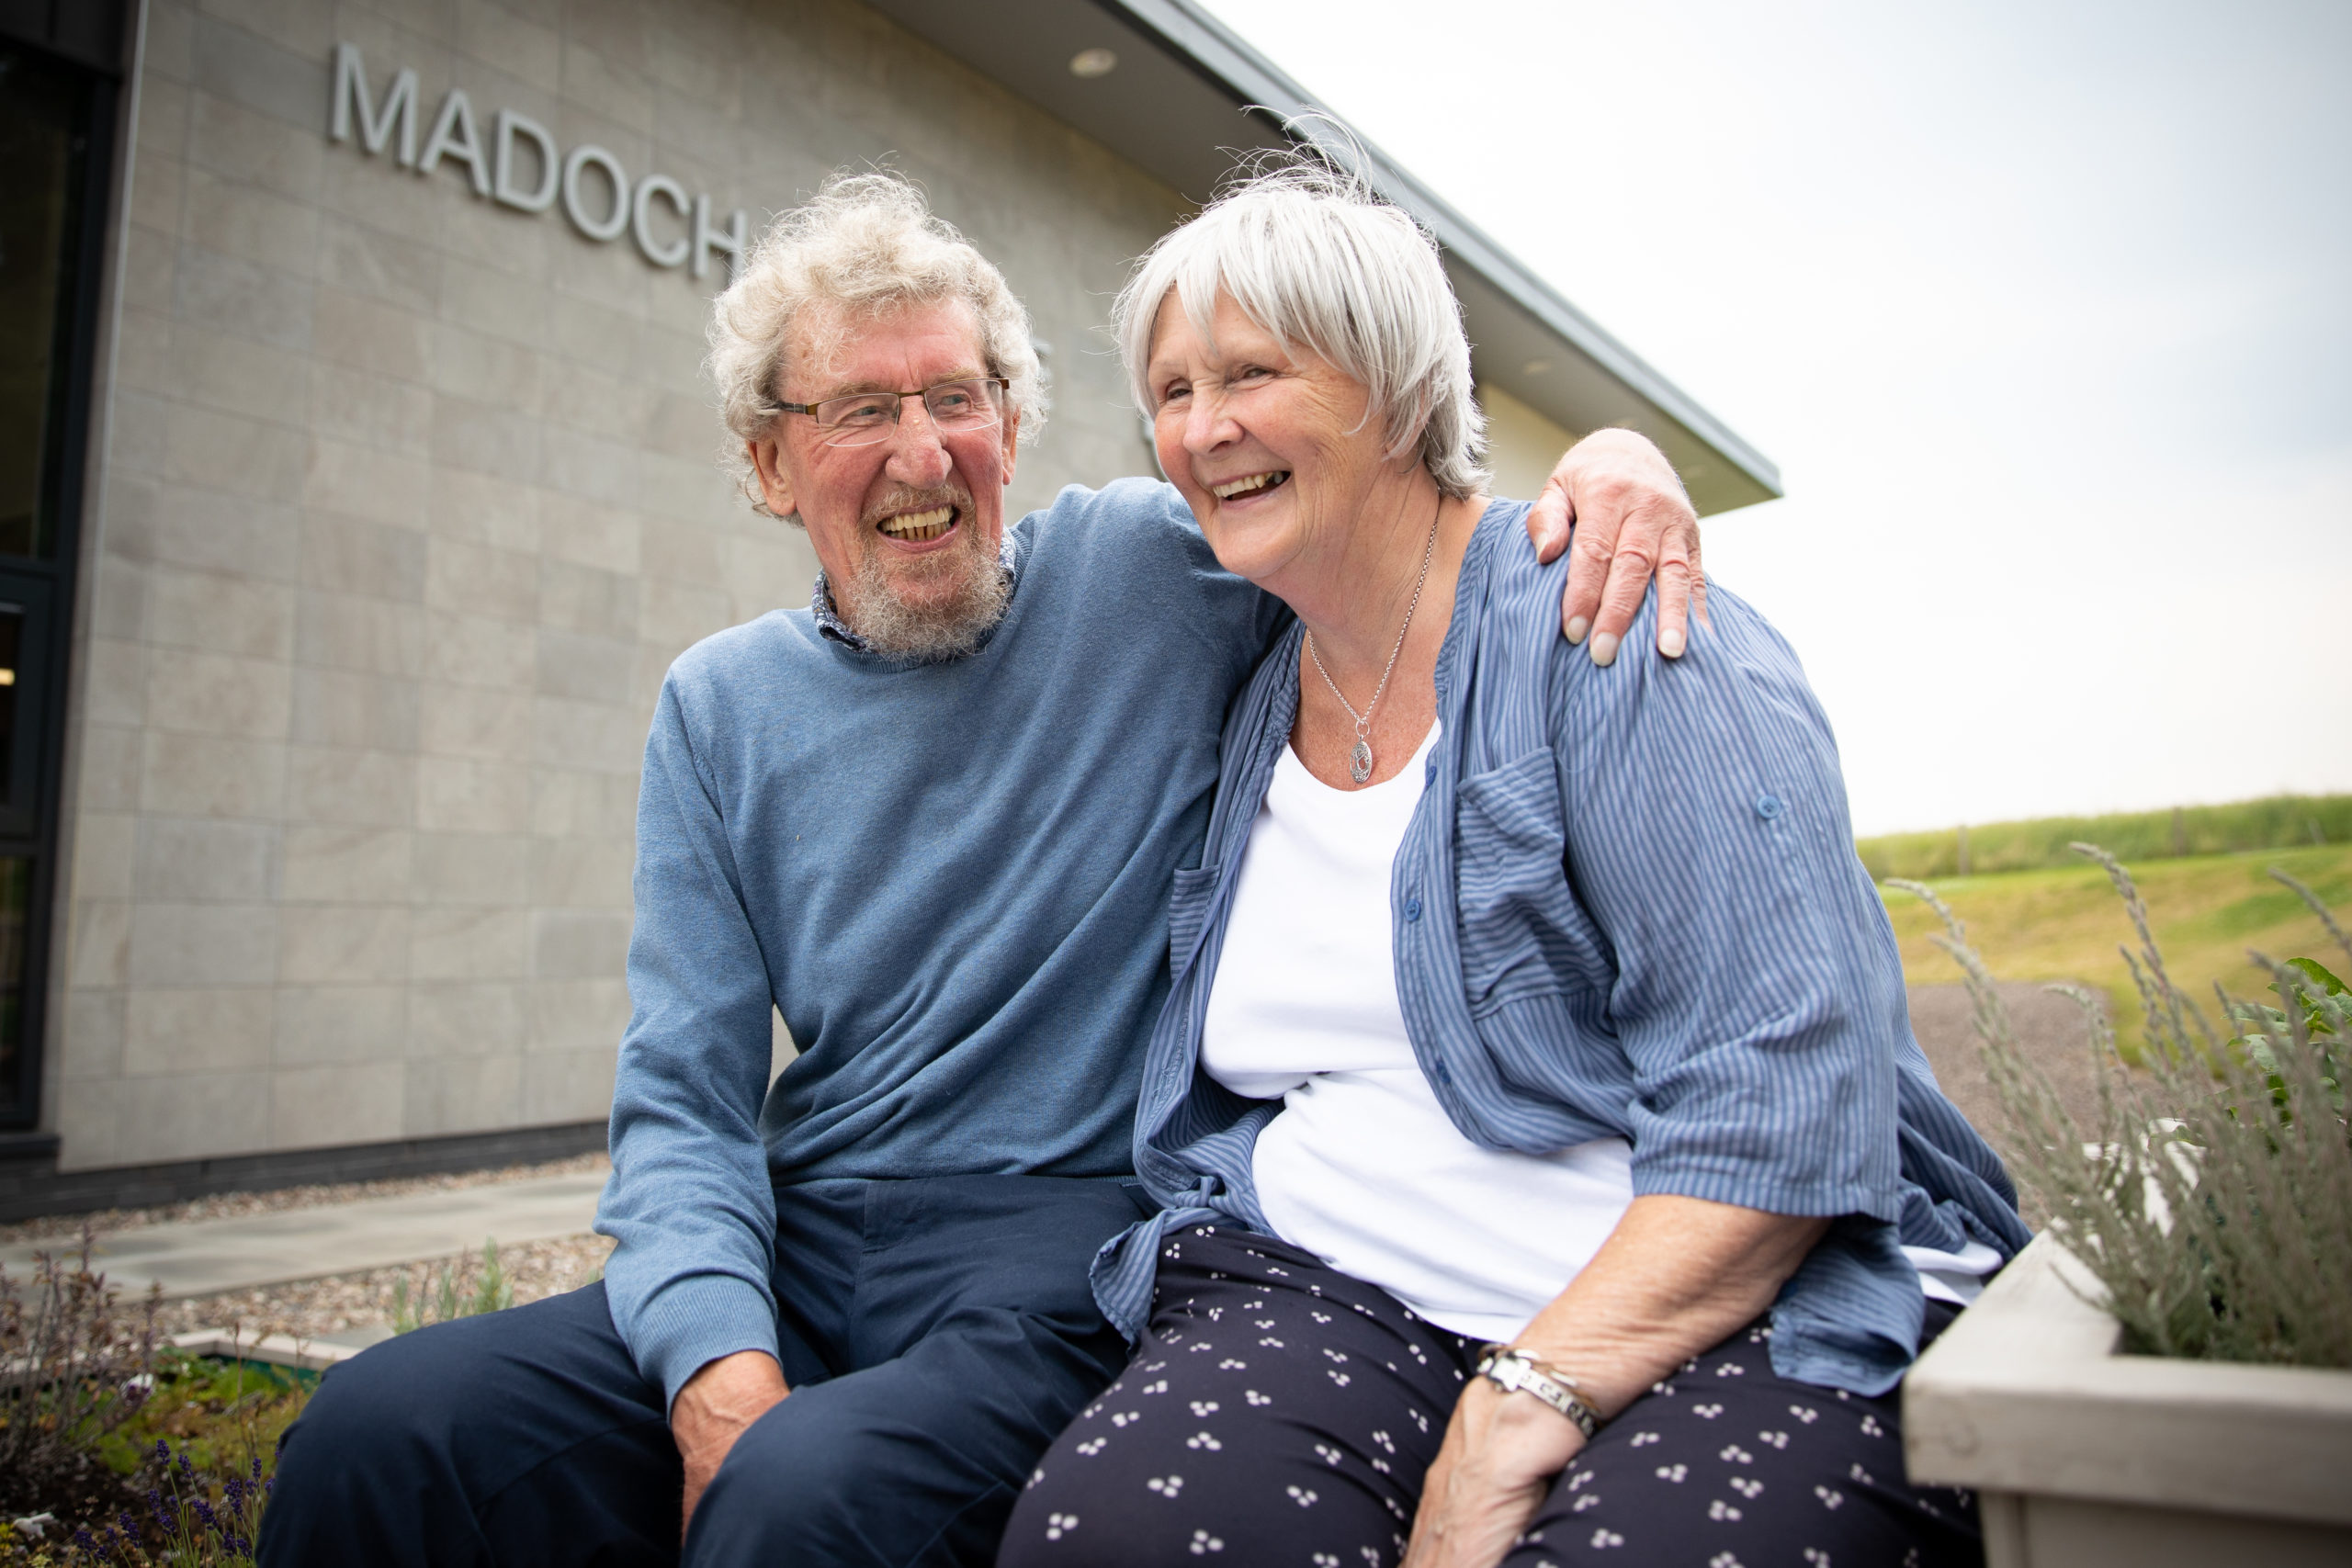 Ann and Jim are now looking forward to an August wedding,